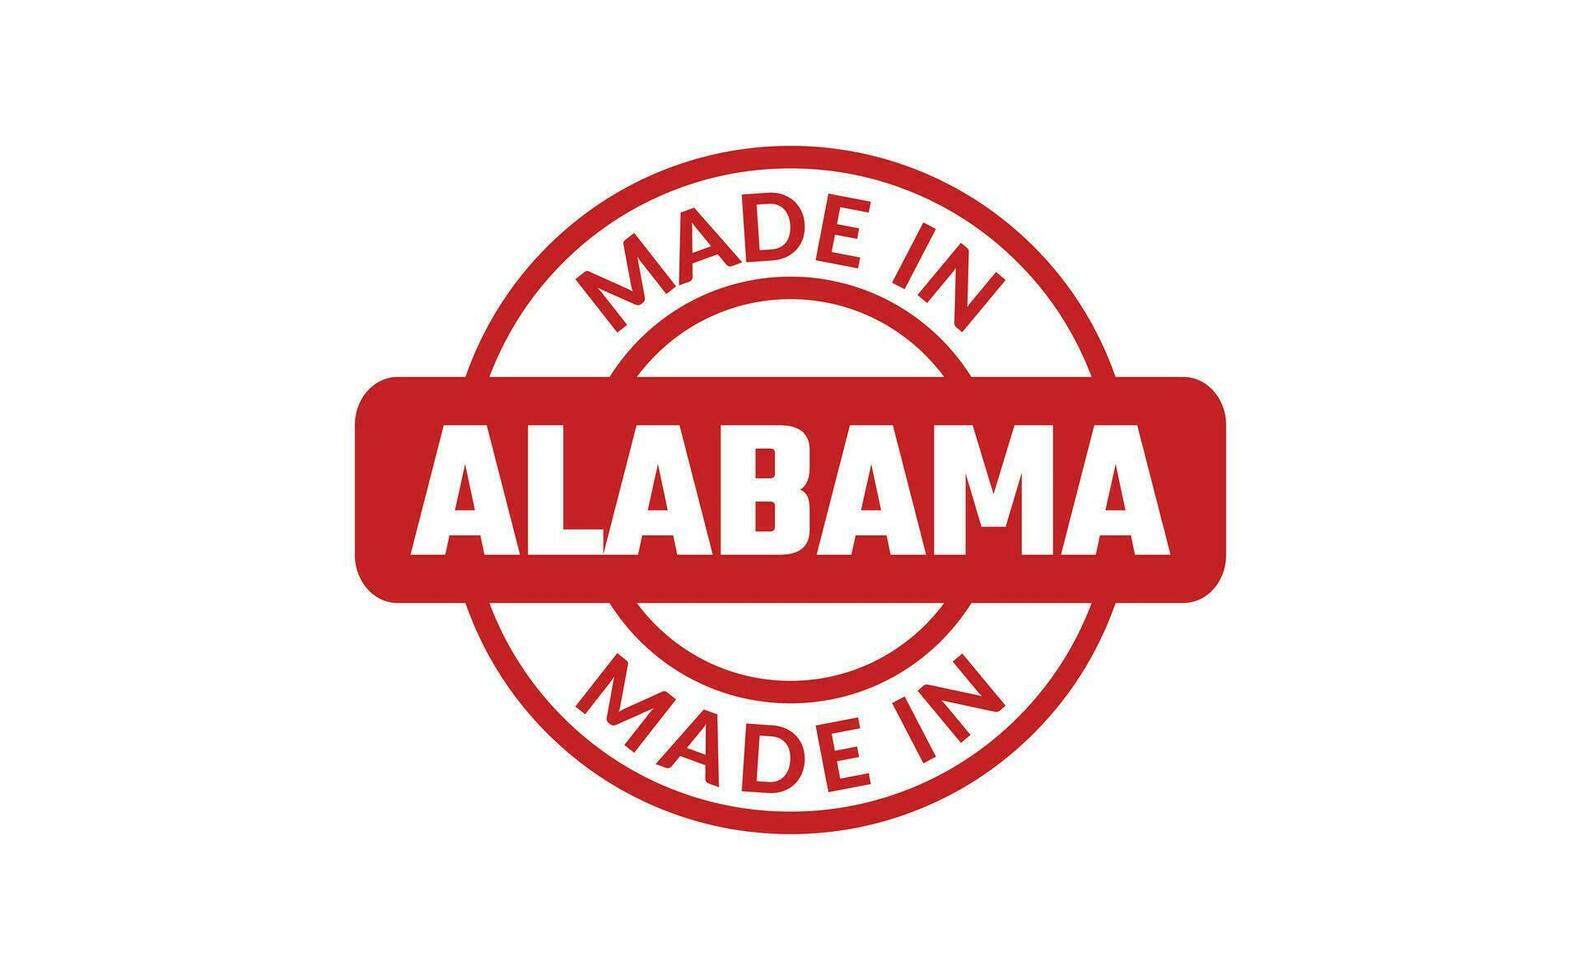 Made In Alabama Rubber Stamp vector